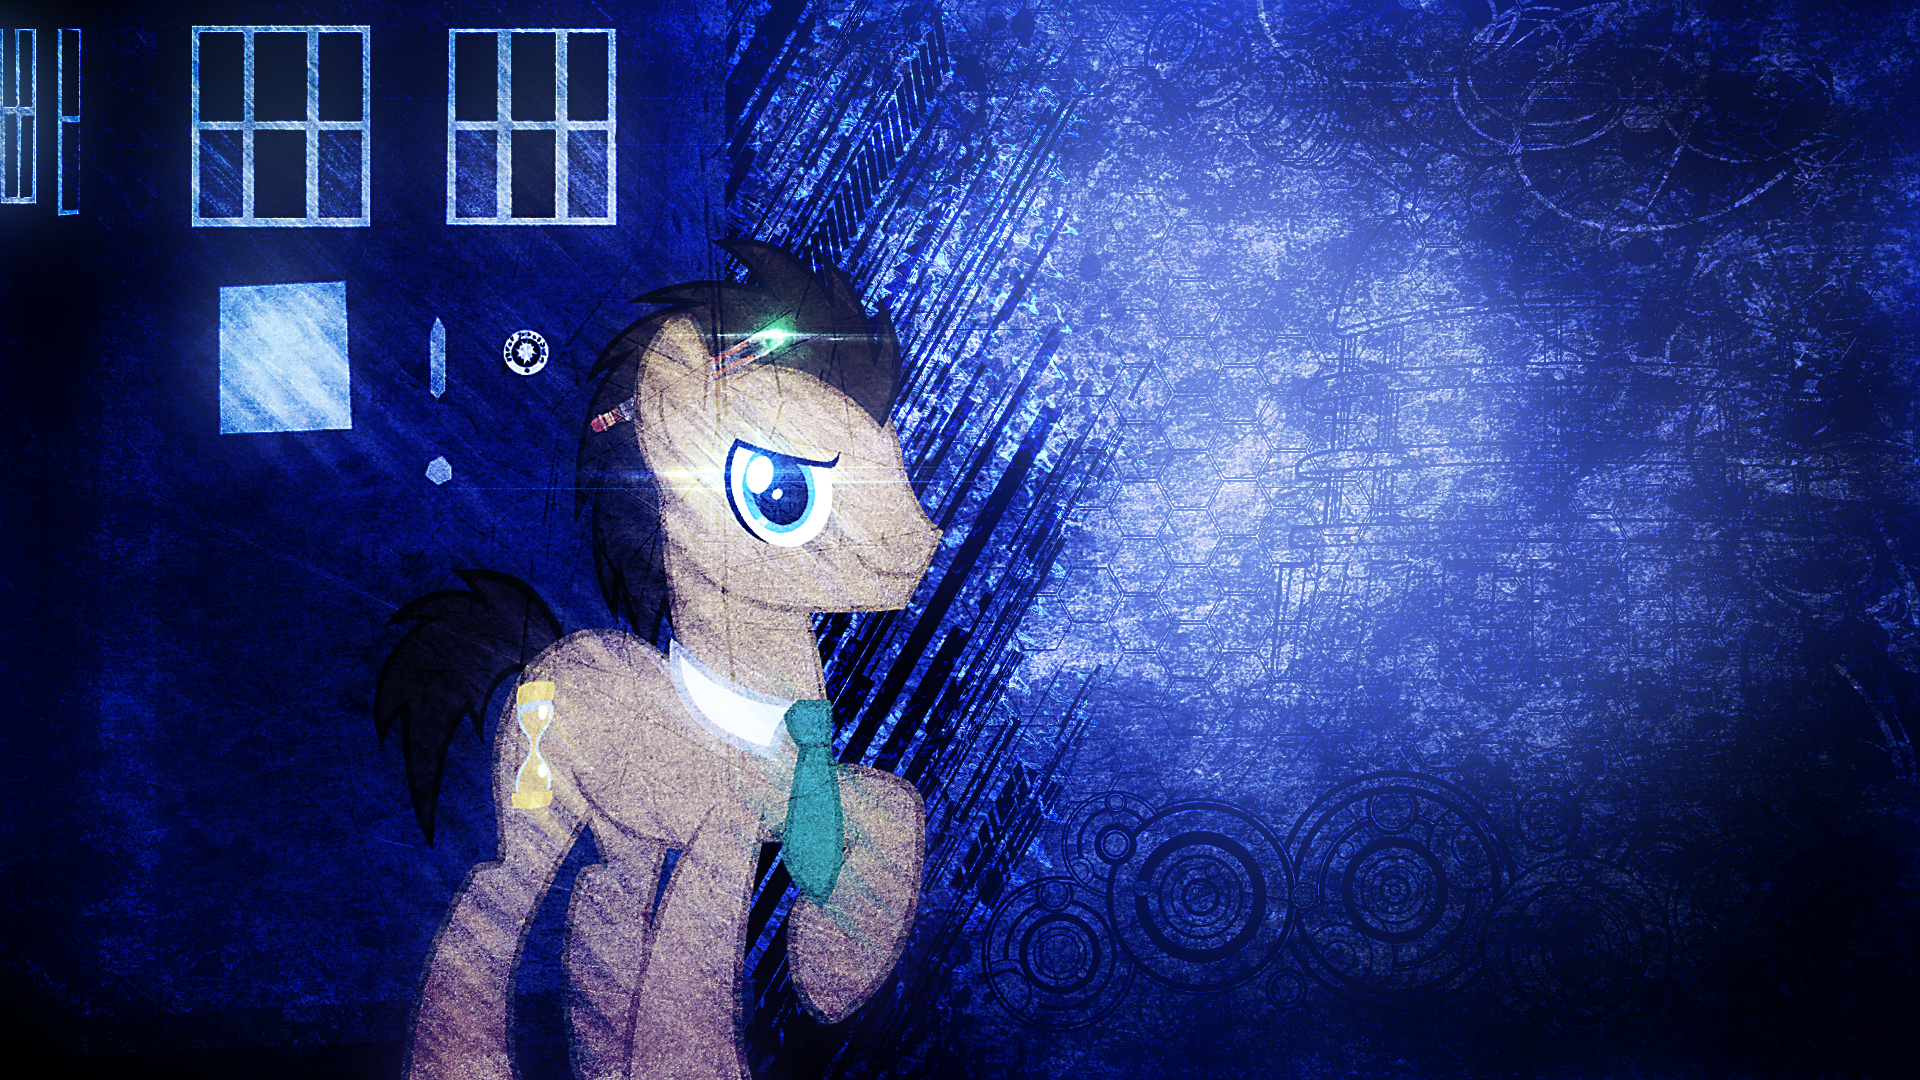 Doctor Whooves Wallpaper by ChiefNX, Sculcuvant, TheEvilFlashAnimator and Tzolkine